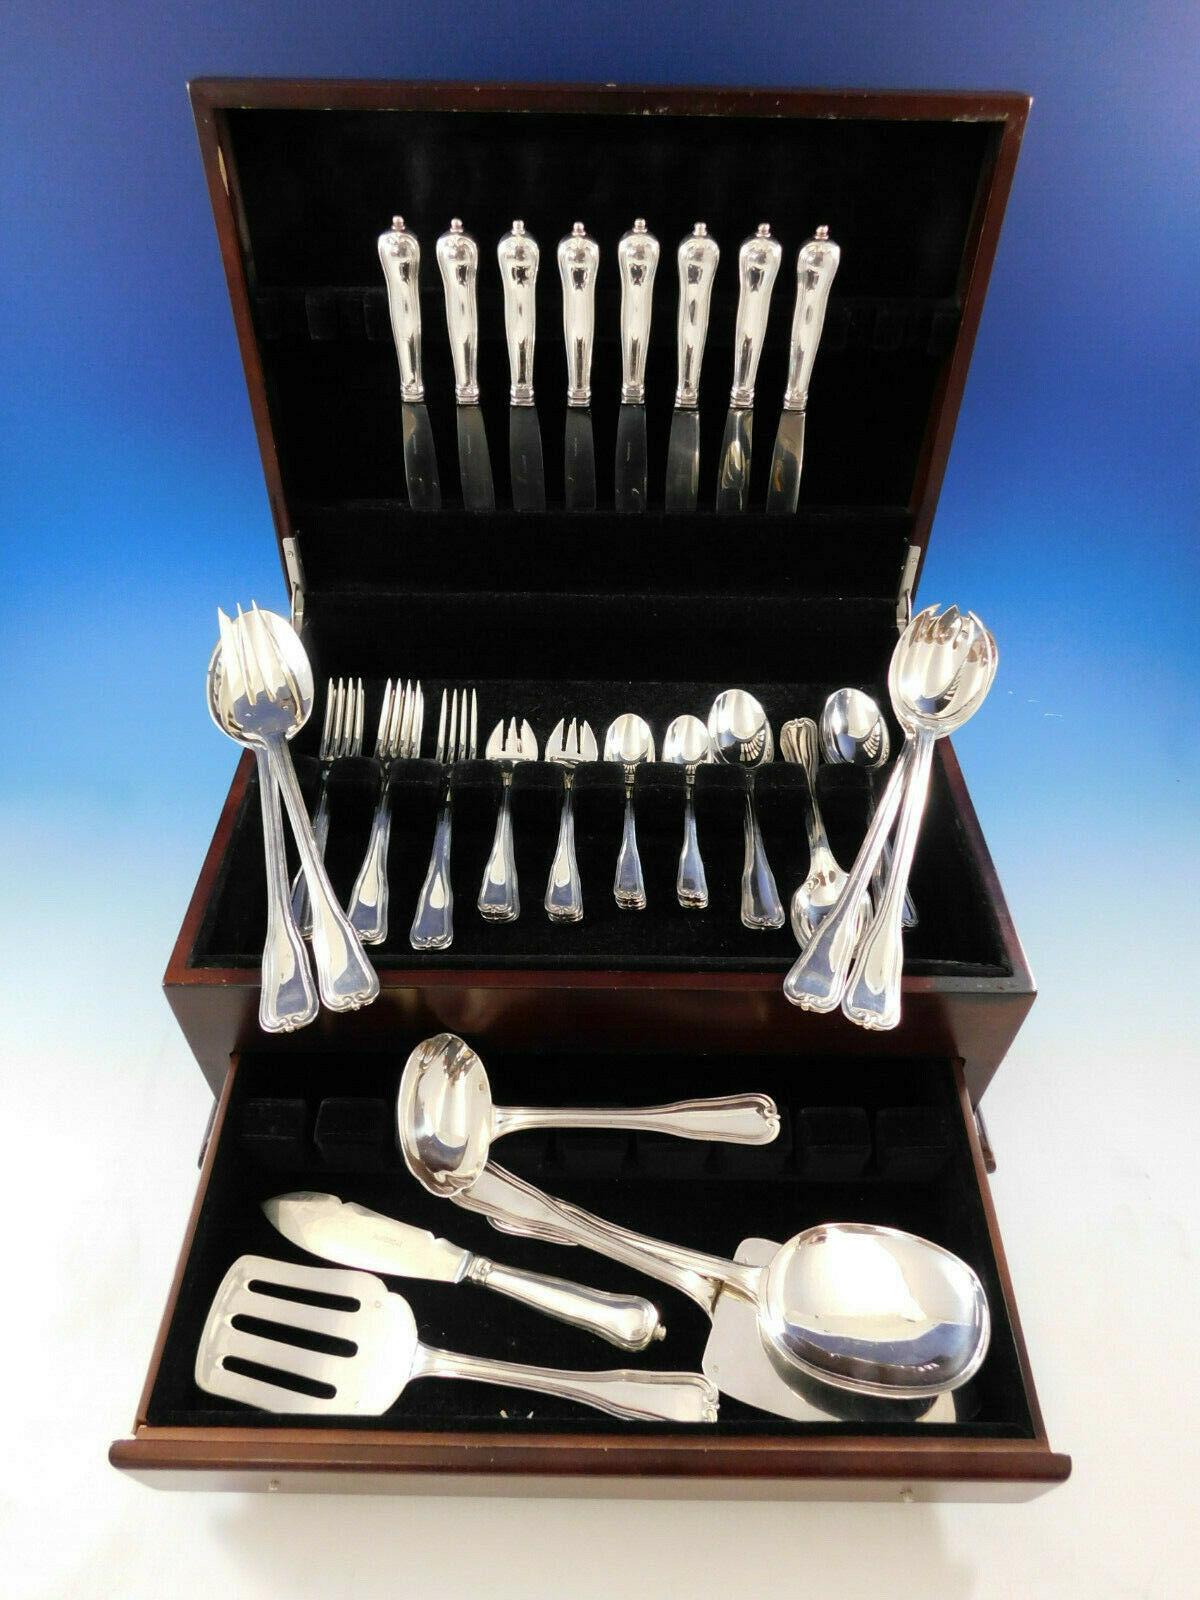 Outstanding Choiseul by Puiforcat France sterling silver flatware set, 47 pieces. This set includes:

8 luncheon/dessert knives, 8 1/4